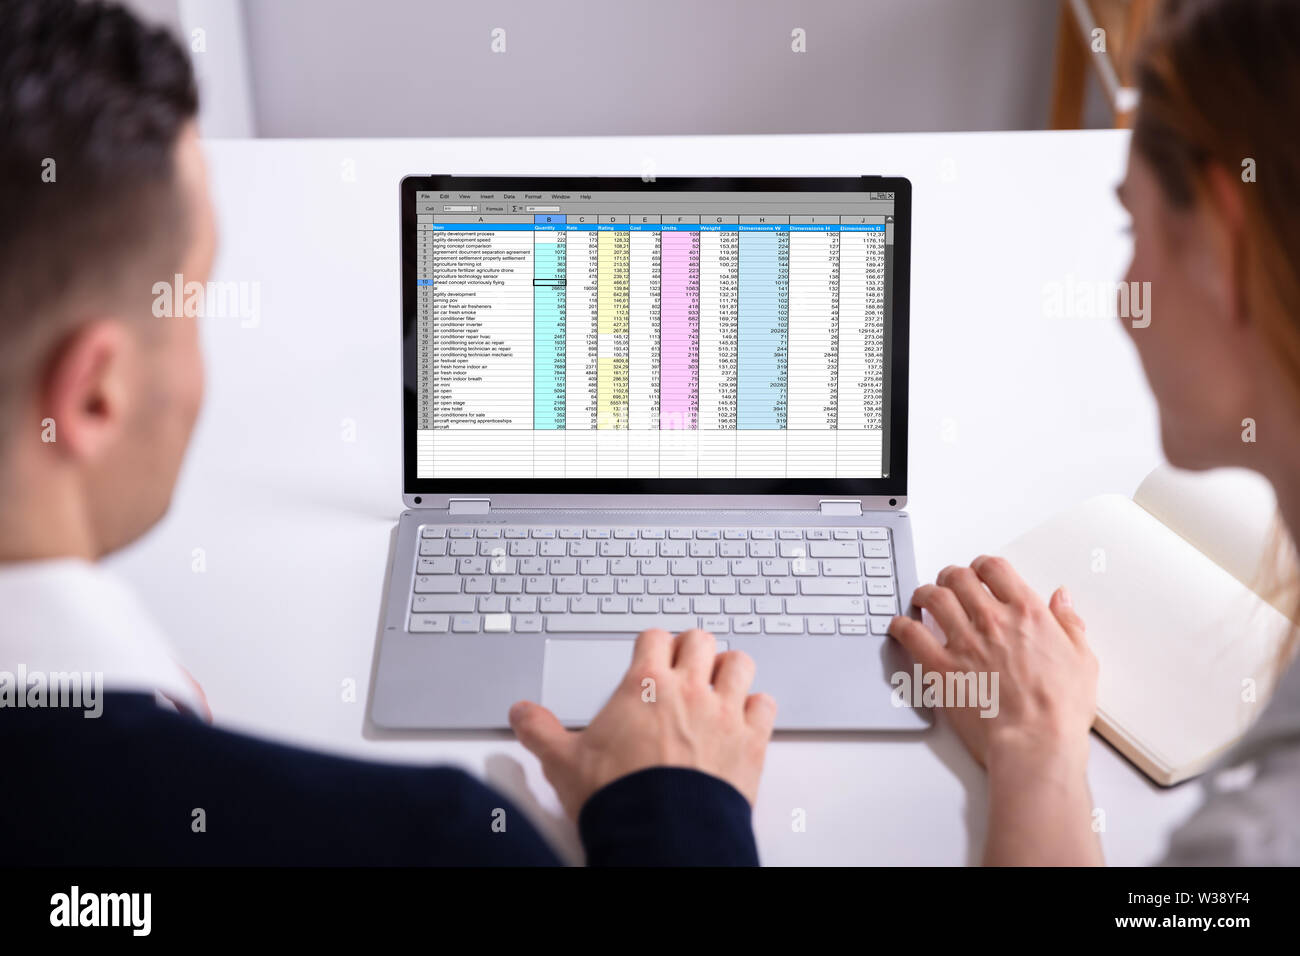 Male And Female Businesspeople Checking Spreadsheet On Laptop Screen Over Desk Stock Photo